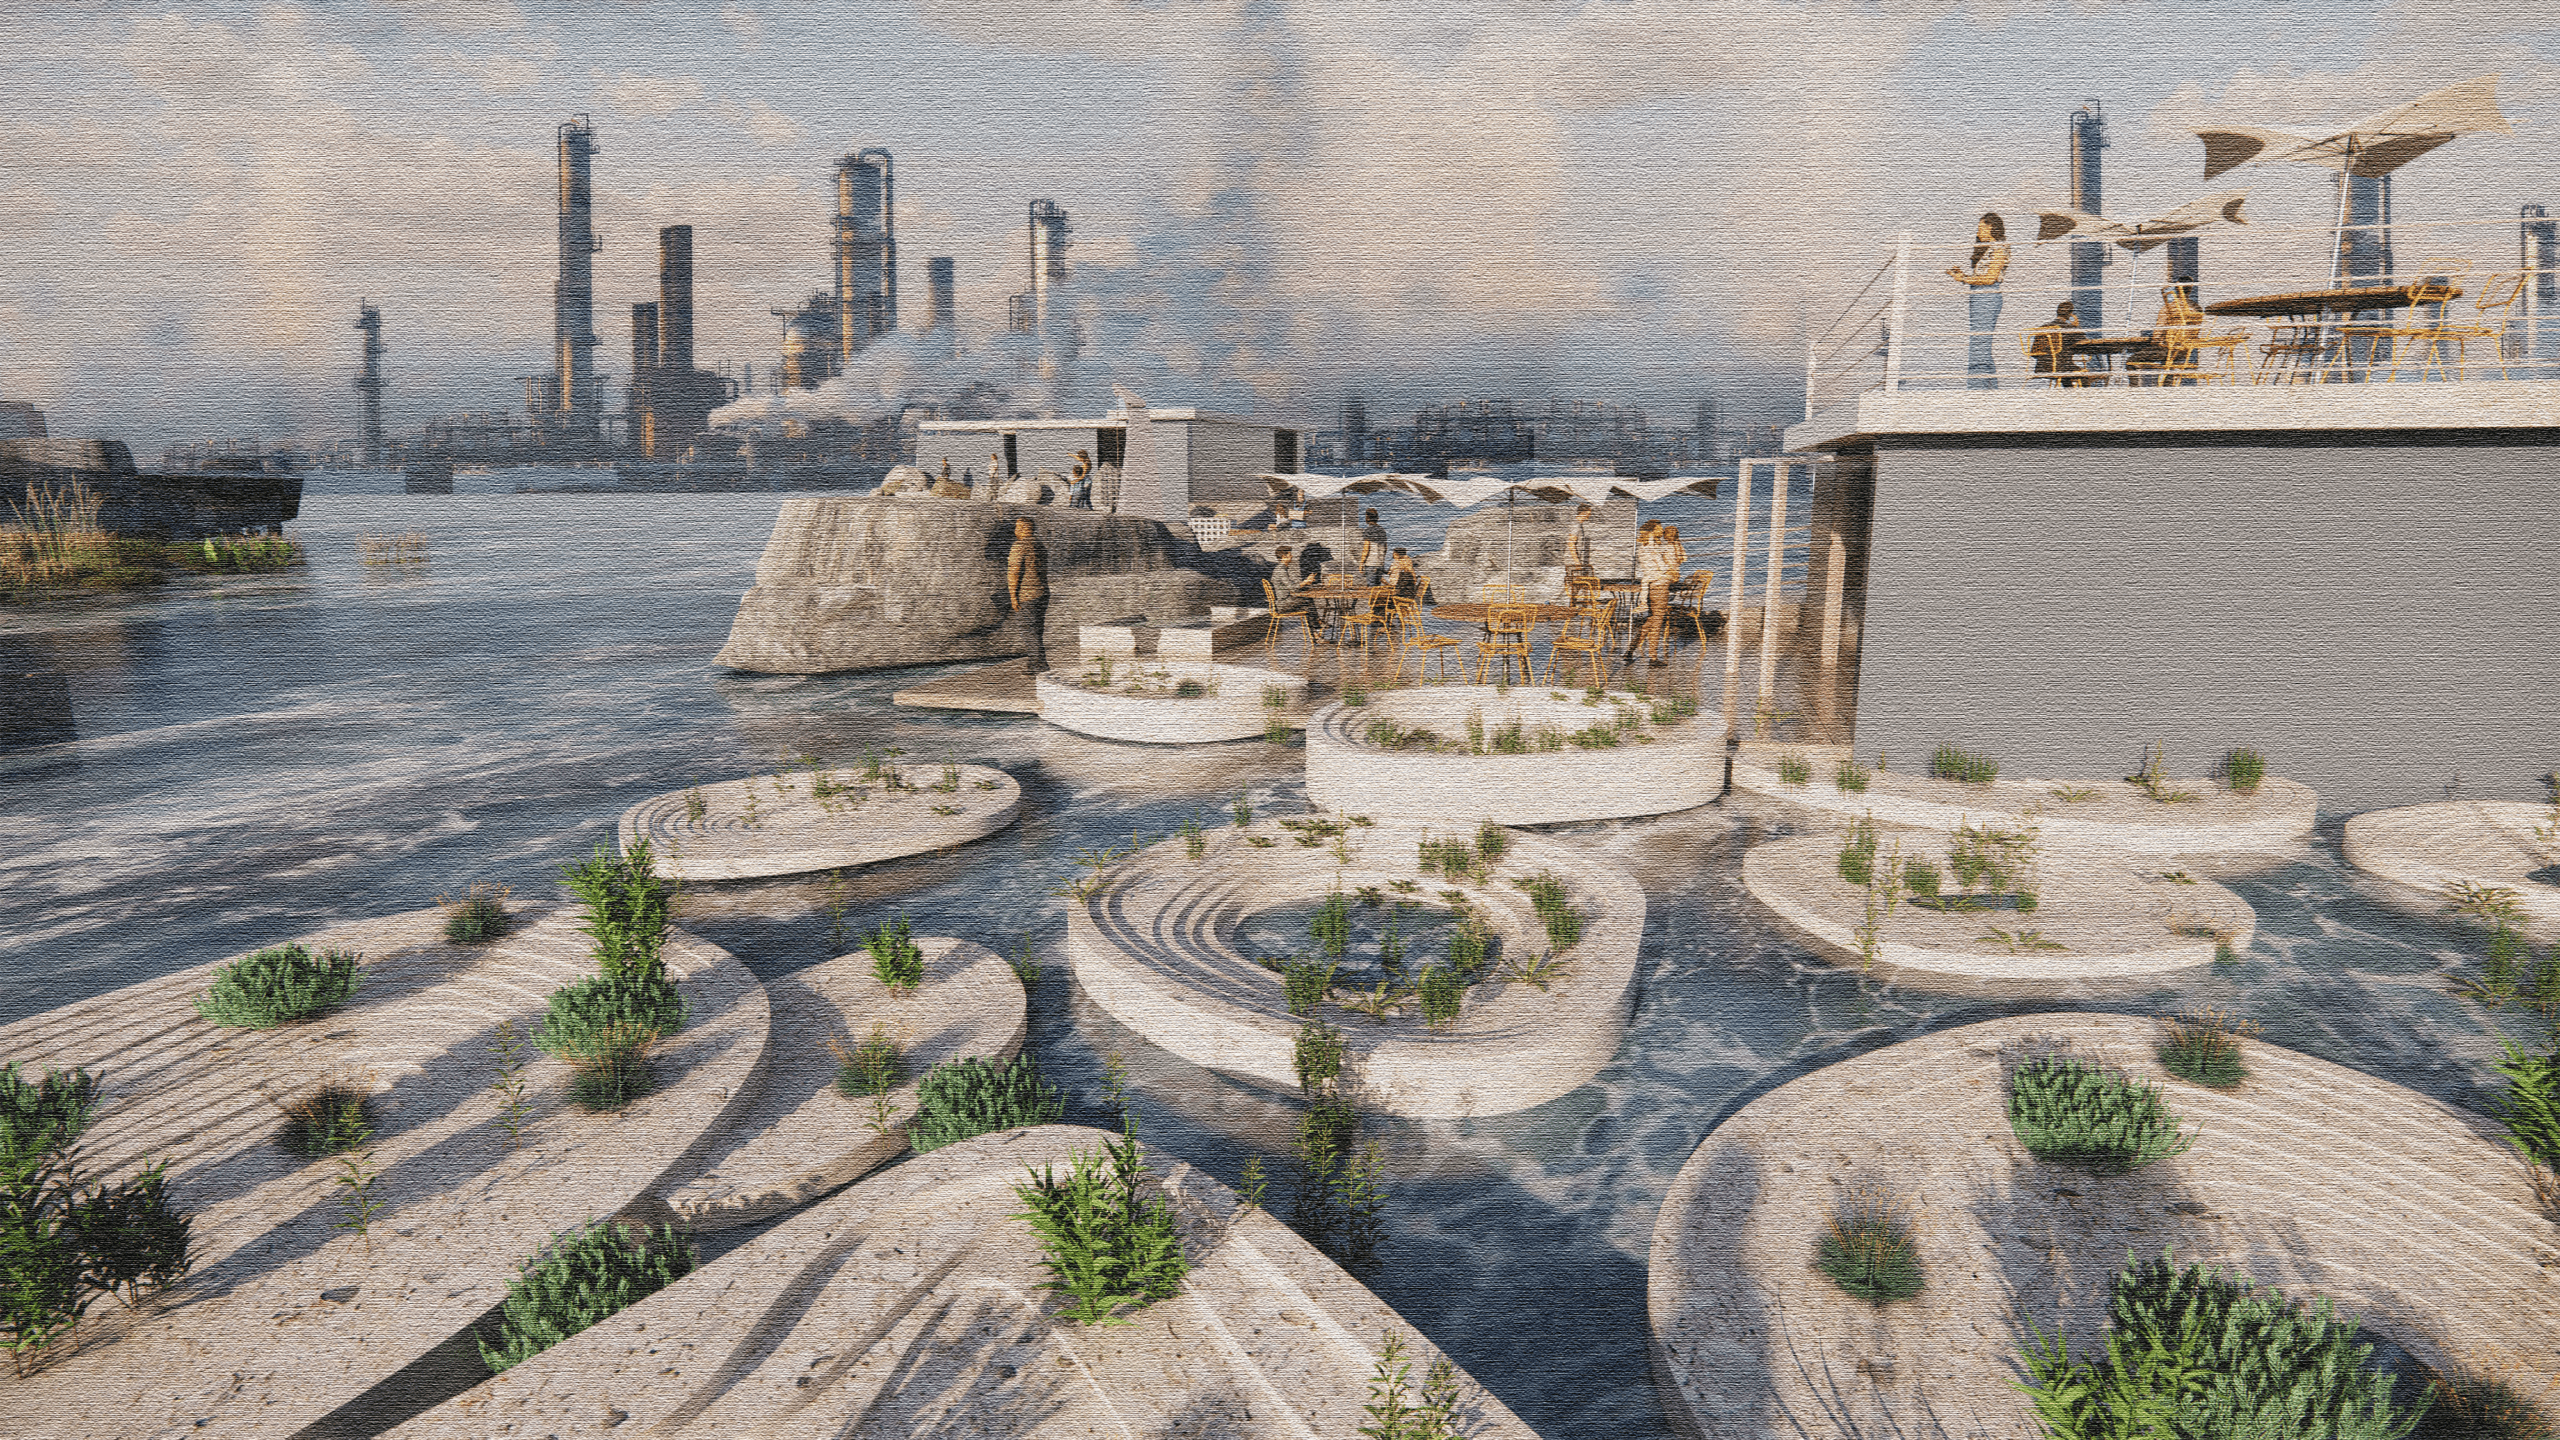 Render of architecture designed park with a city skyline in the background